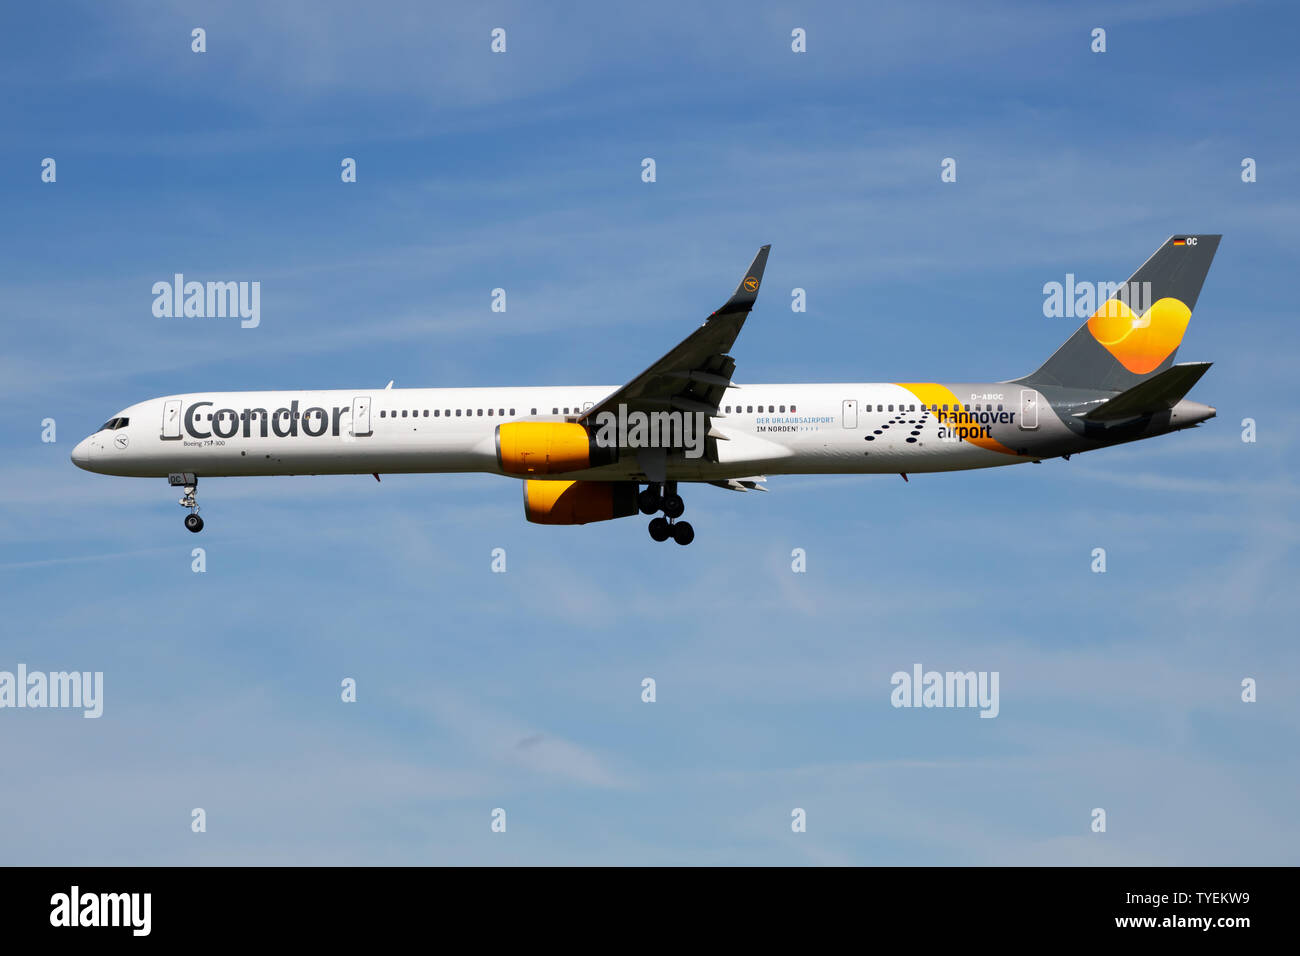 HAMBURG / GERMANY - JULY 6, 2017: Condor Airlines special sticker ...